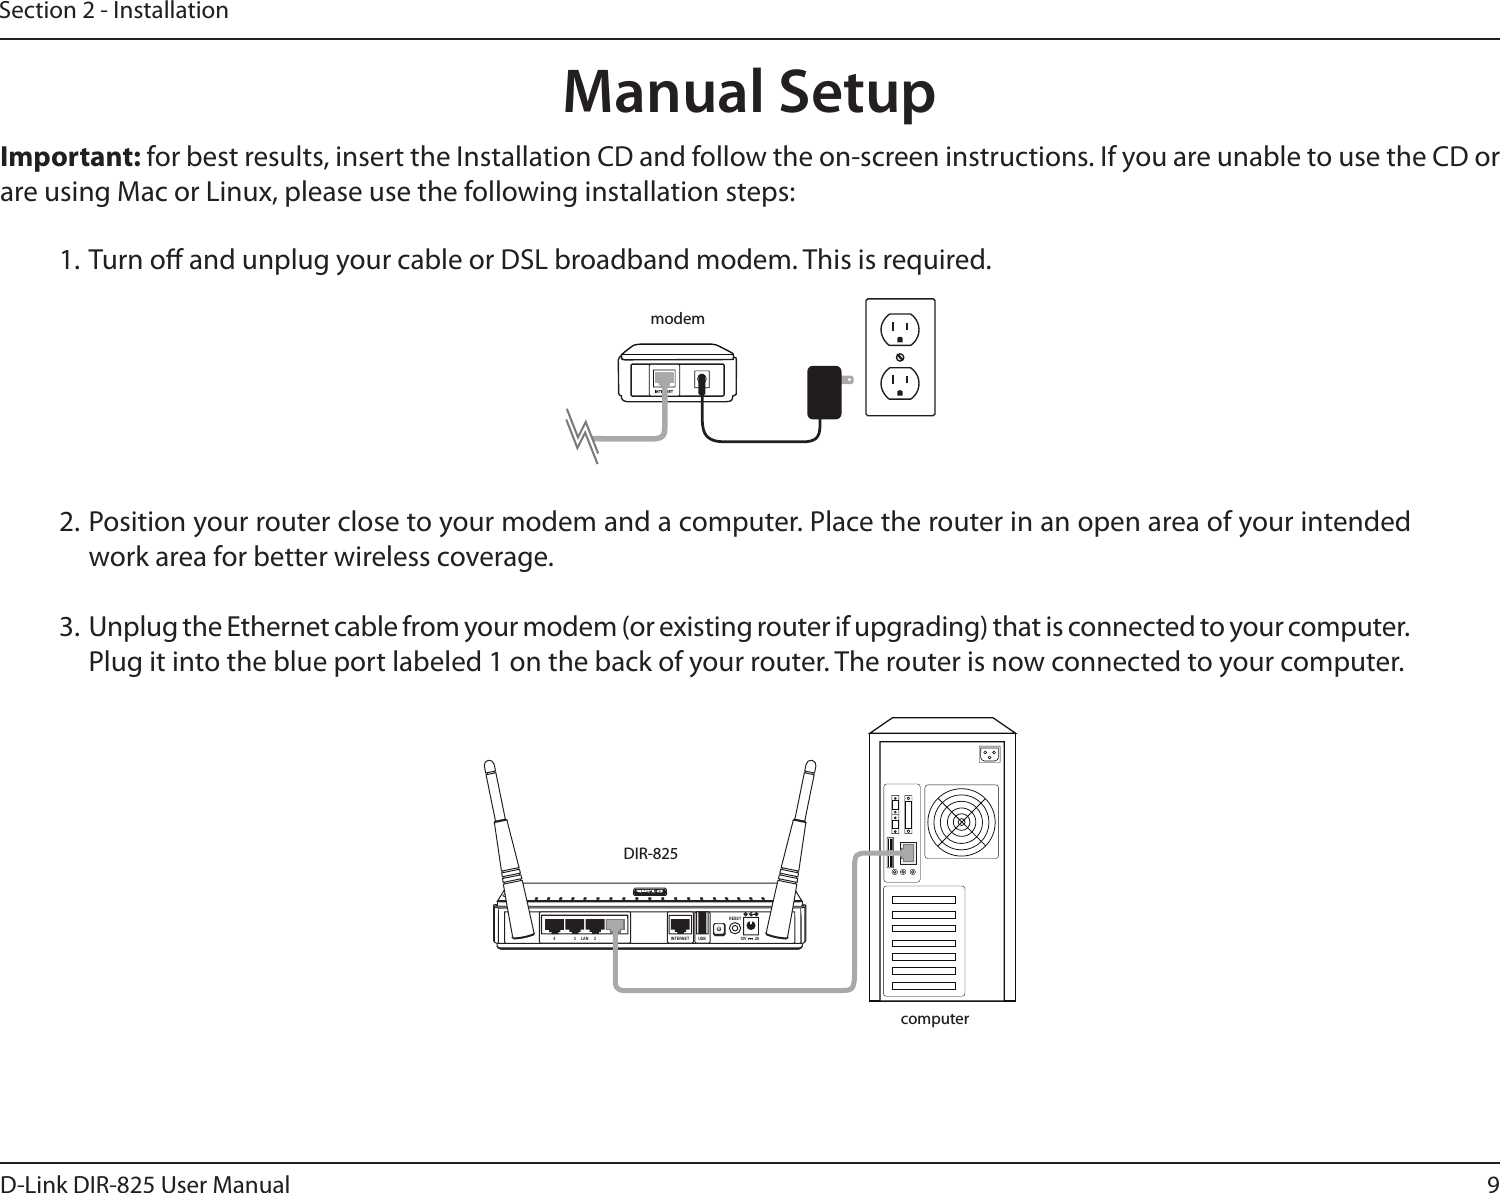 9D-Link DIR-825 User ManualSection 2 - Installation1. Turn o and unplug your cable or DSL broadband modem. This is required.Manual Setup12V ---2A4 3 LAN 2 1 INTERNET USBRESETImportant: for best results, insert the Installation CD and follow the on-screen instructions. If you are unable to use the CD or are using Mac or Linux, please use the following installation steps:2. Position your router close to your modem and a computer. Place the router in an open area of your intended work area for better wireless coverage.3. Unplug the Ethernet cable from your modem (or existing router if upgrading) that is connected to your computer. Plug it into the blue port labeled 1 on the back of your router. The router is now connected to your computer.modemDIR-825computer